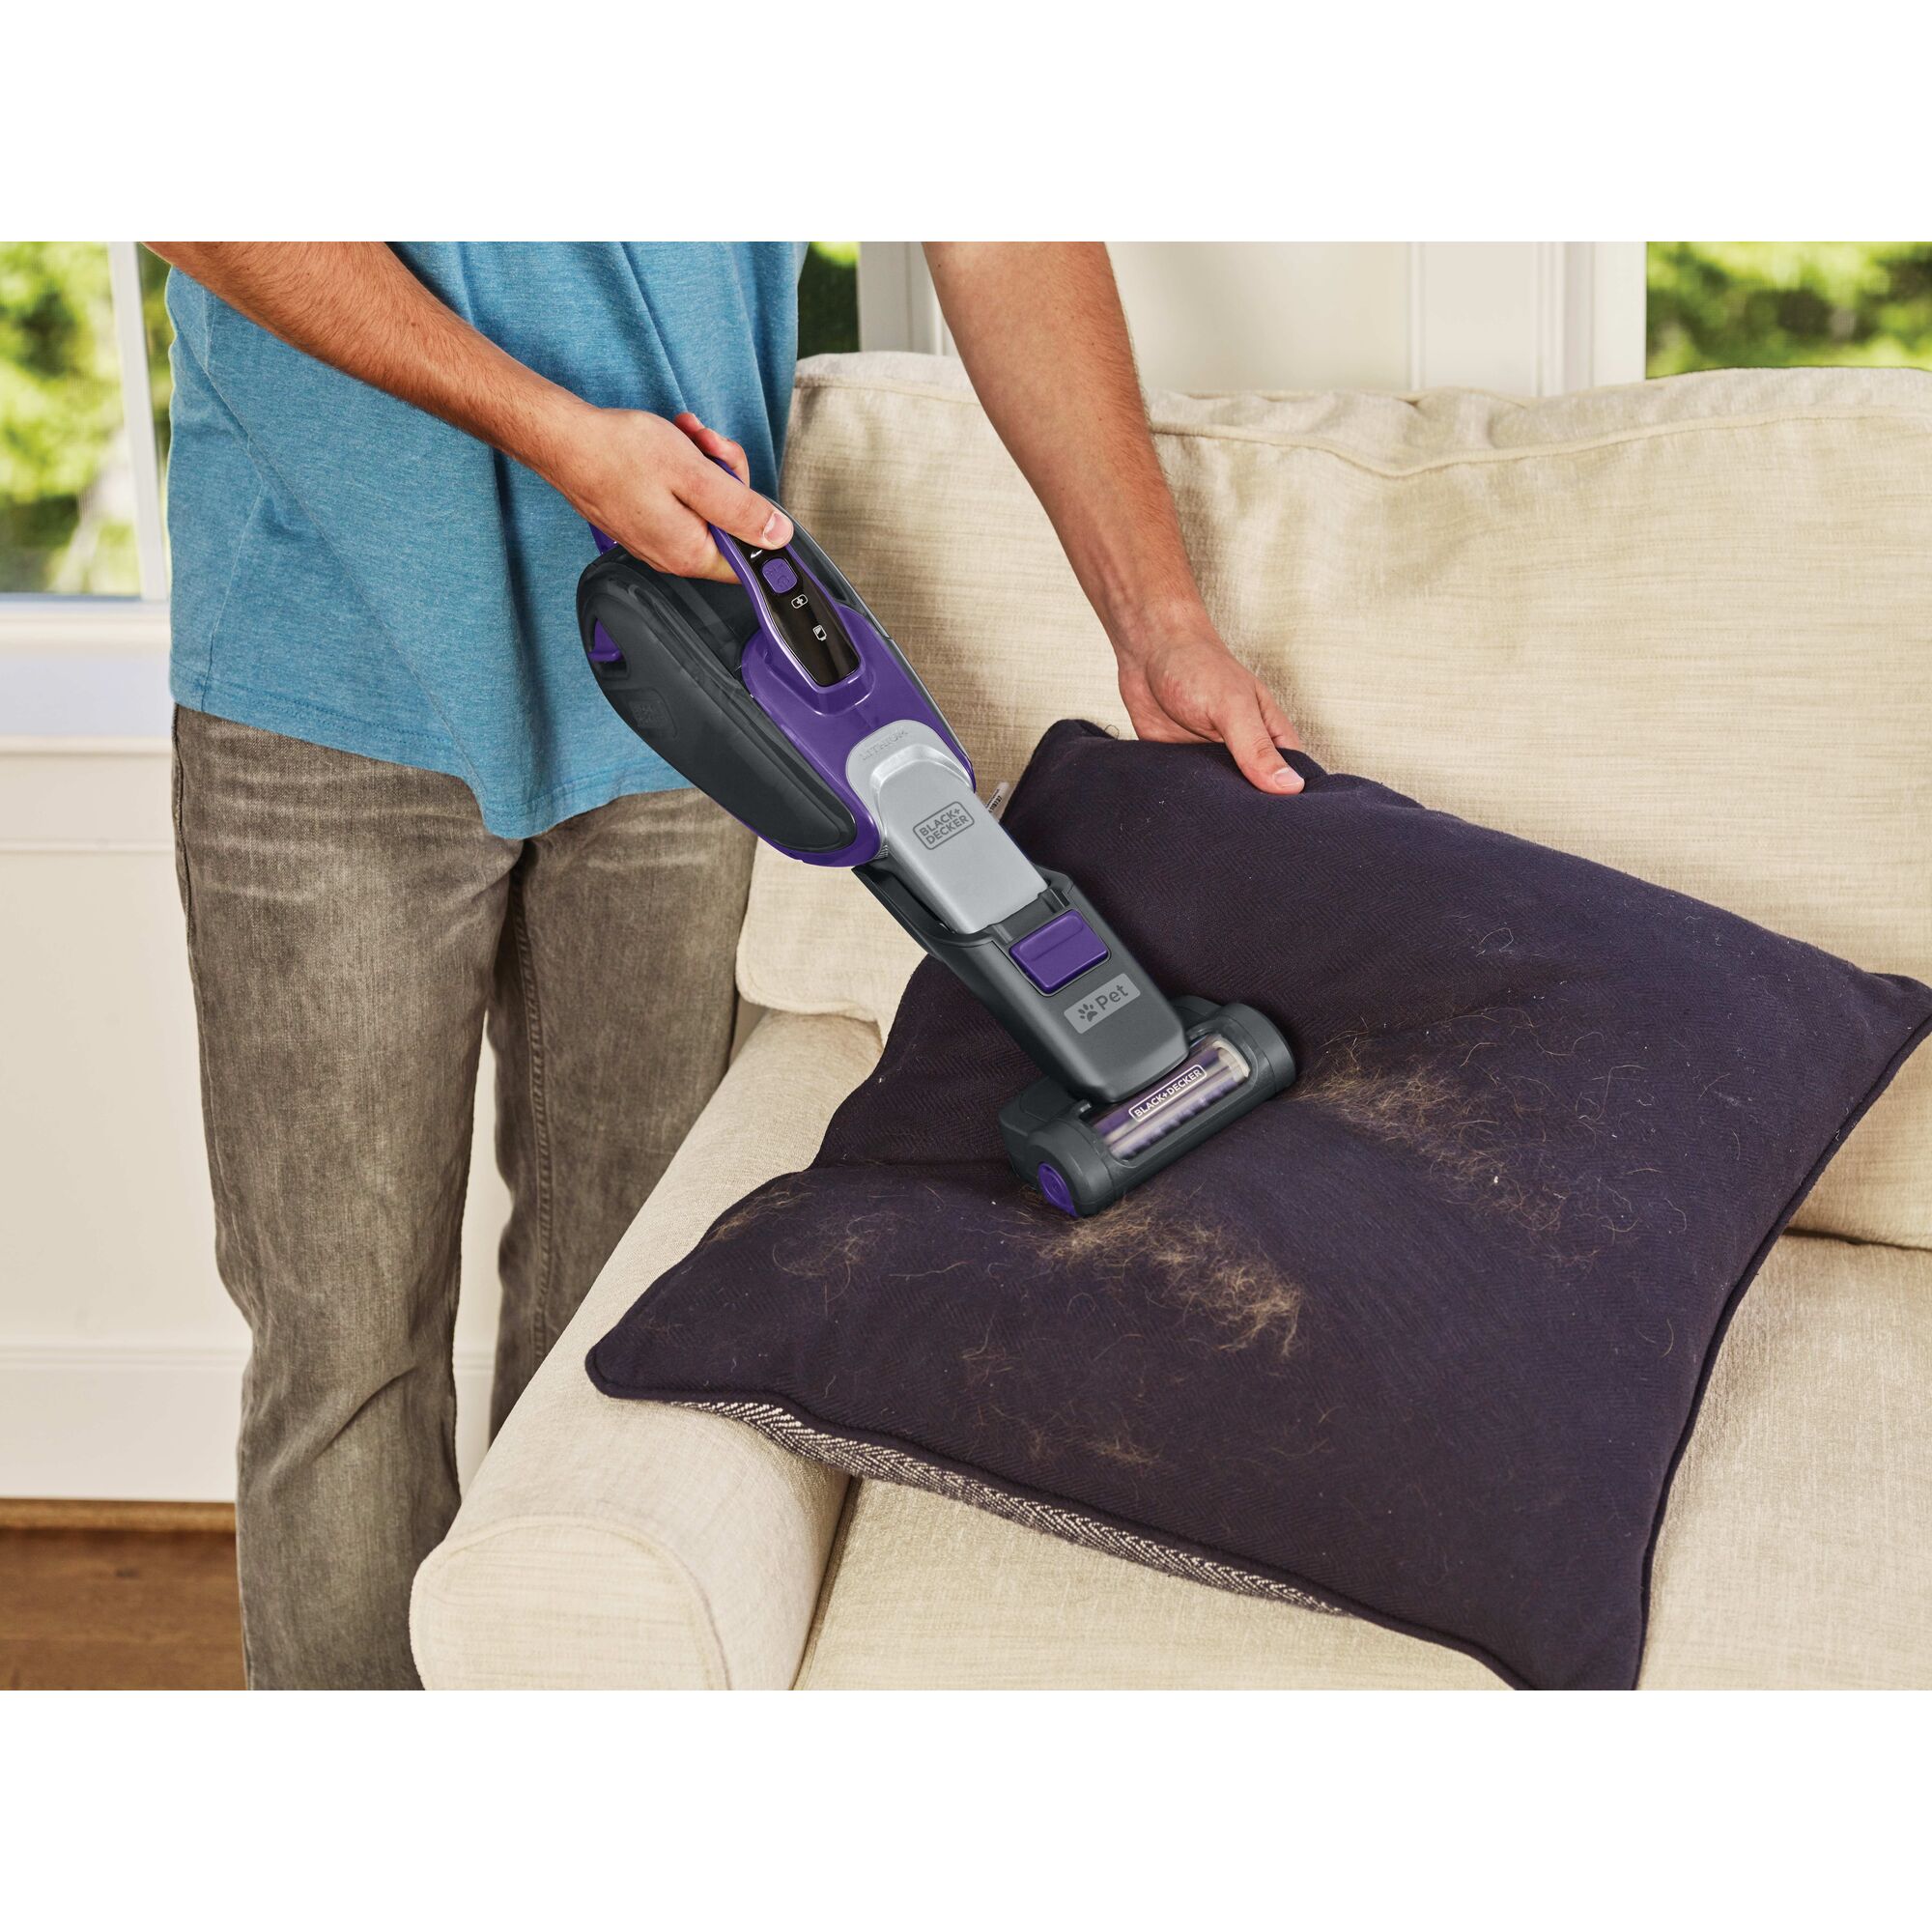 Dust buster Hand Vacuum Pet being used to clean pet hair from cushion.